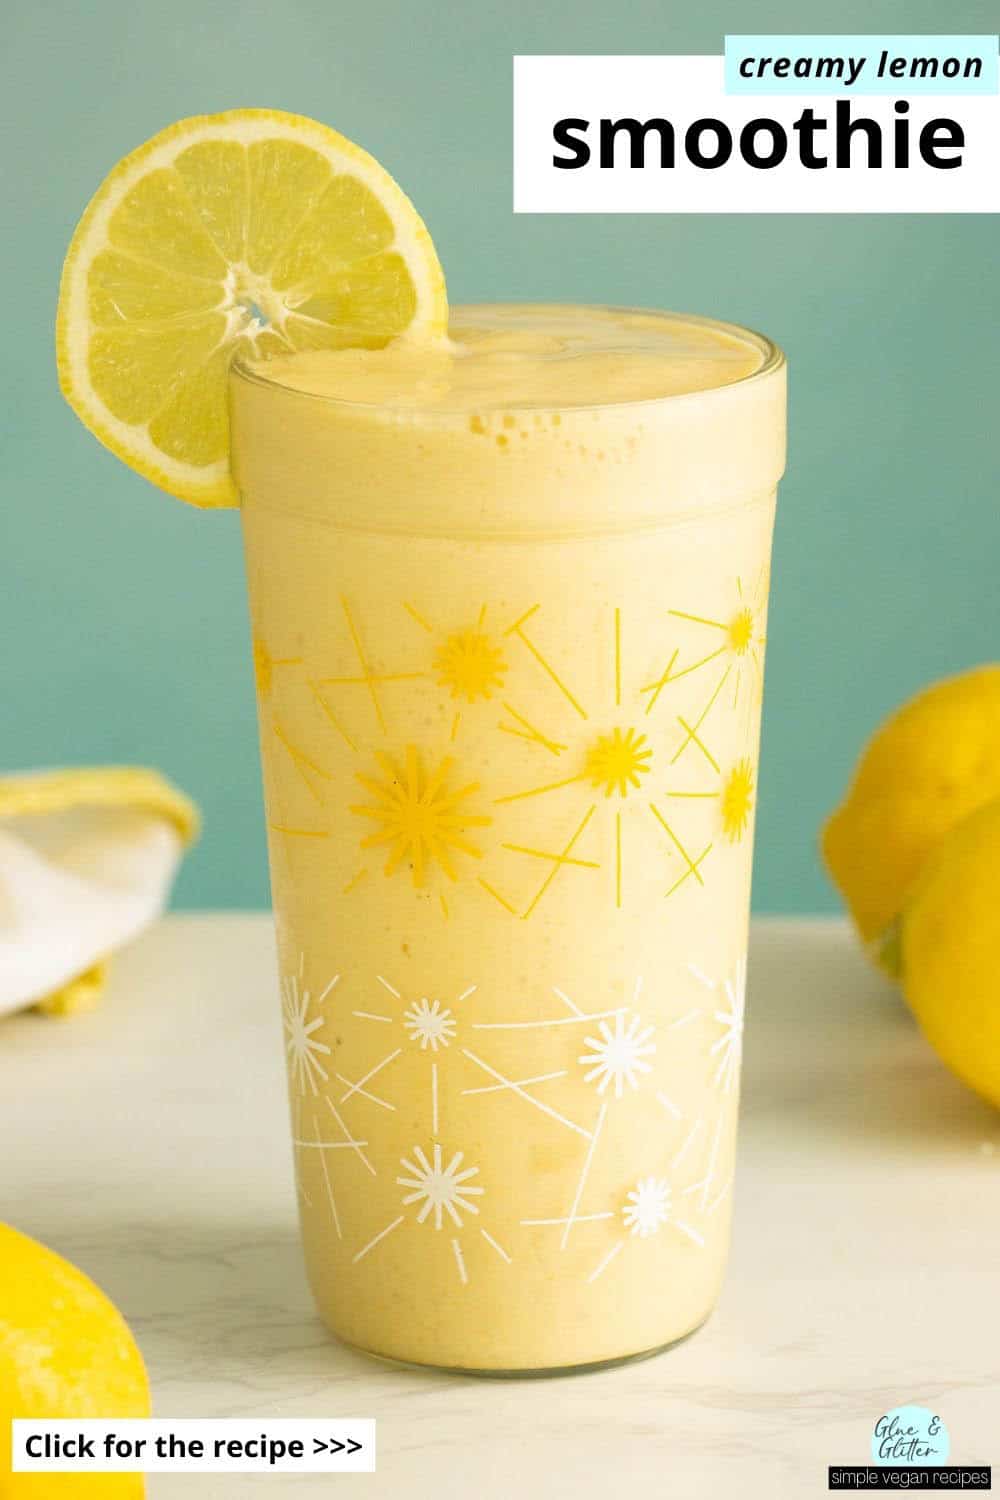 lemon smoothie in a glass with a lemon wheel, text overlay